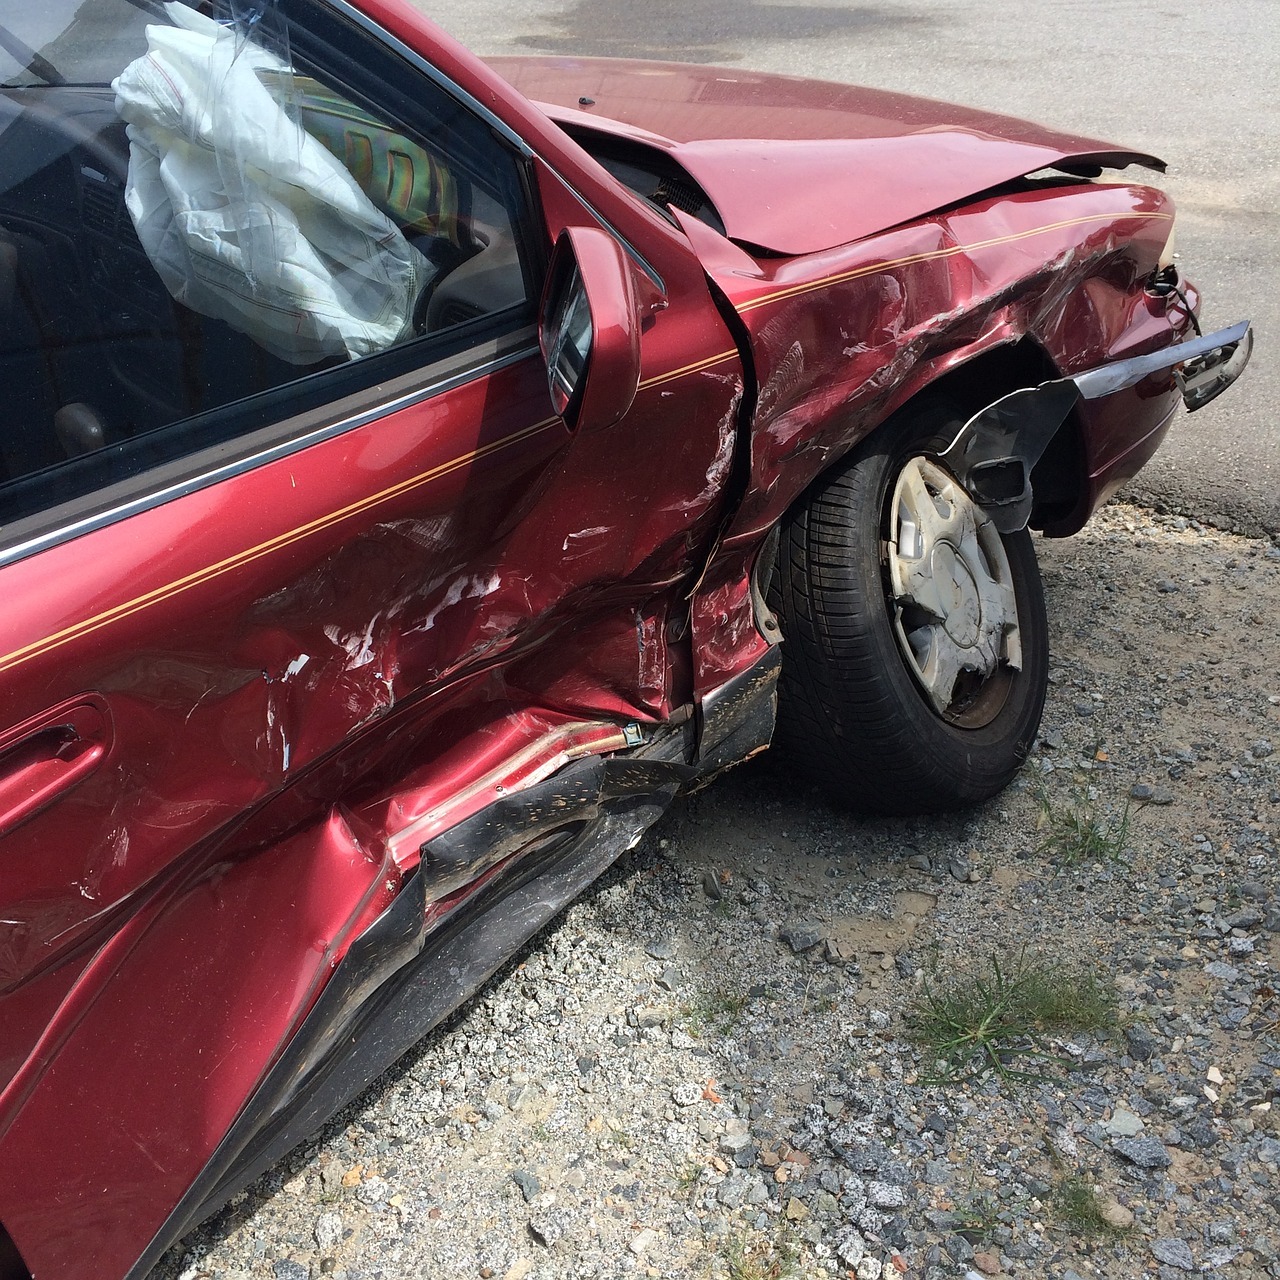 9 Vital Things You Need to Do After Your First Car Accident